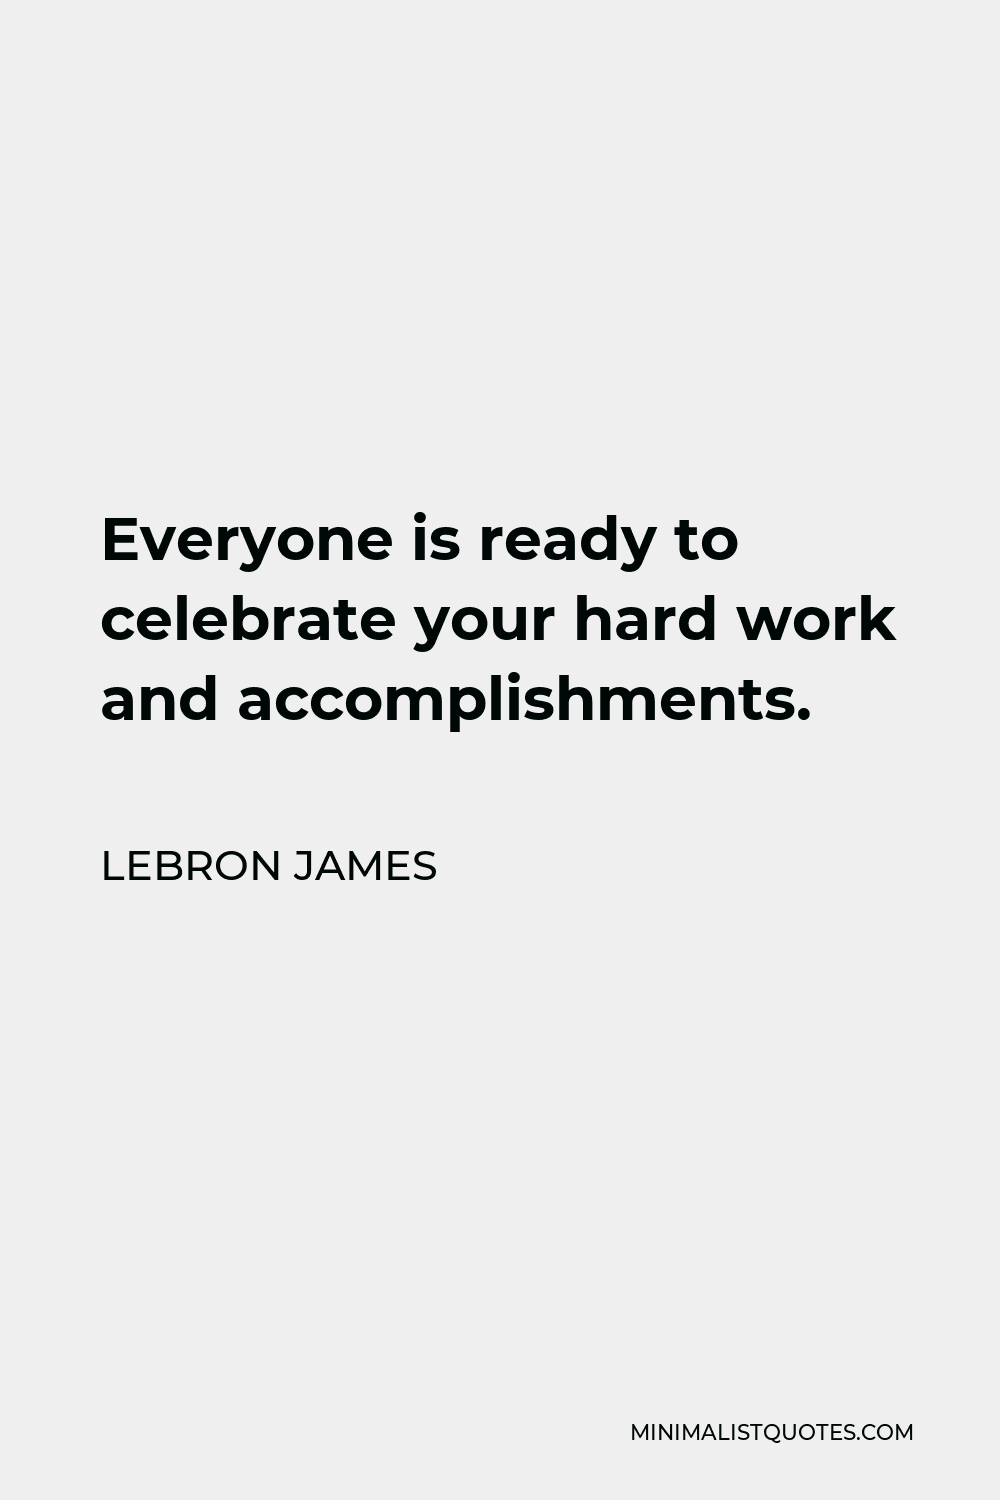 LeBron James Quote - Everyone is ready to celebrate your hard work and accomplishments.